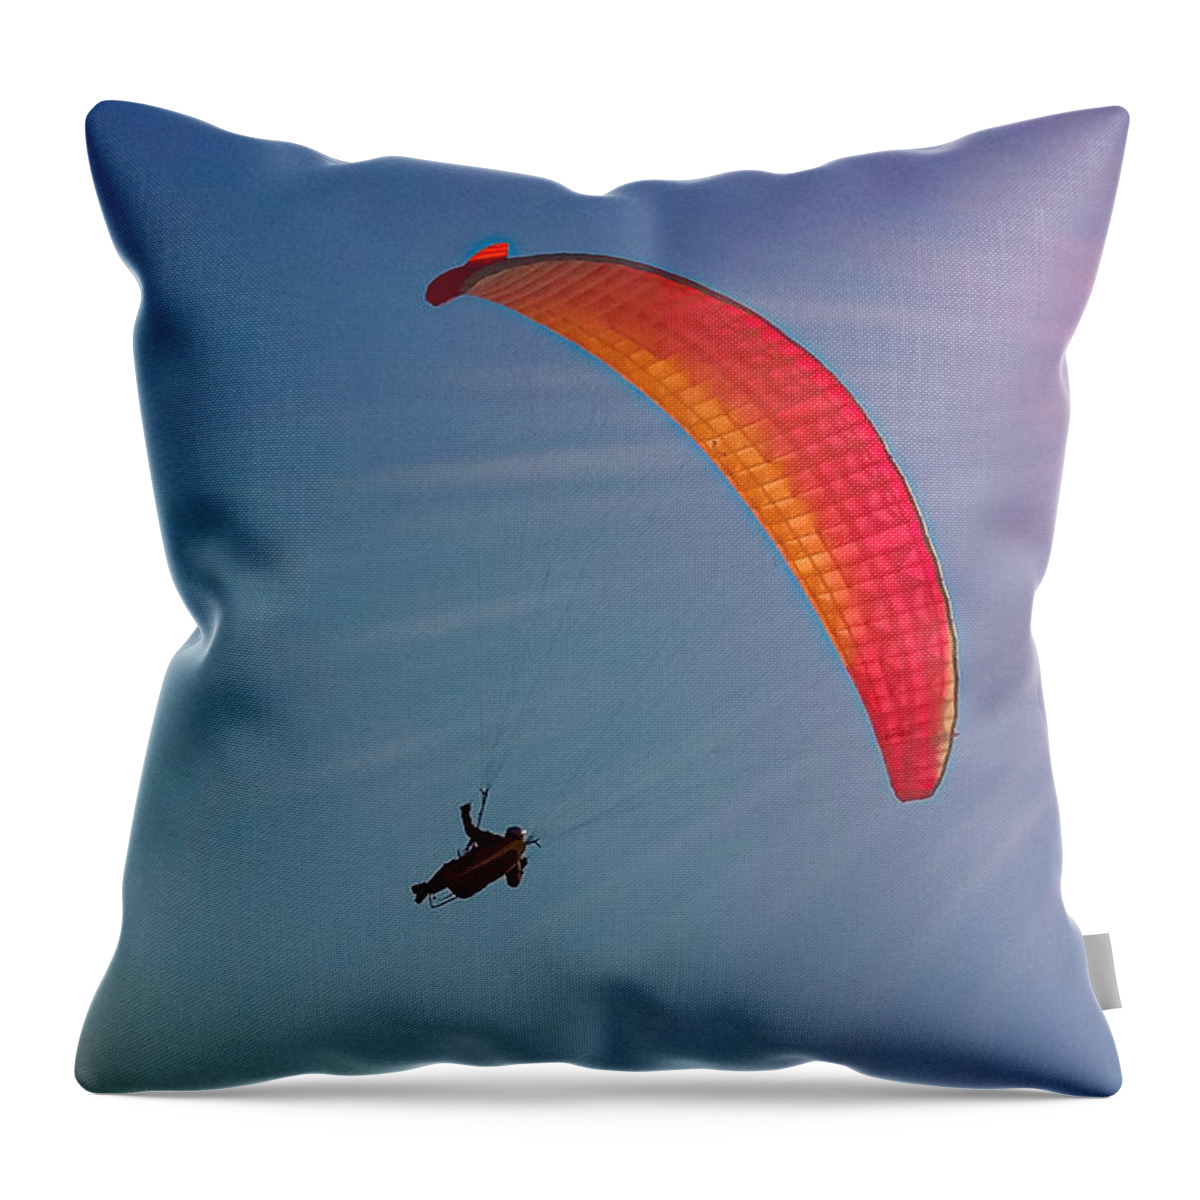 Adventure Throw Pillow featuring the photograph Flying High Towards The Sun by Andre Petrov